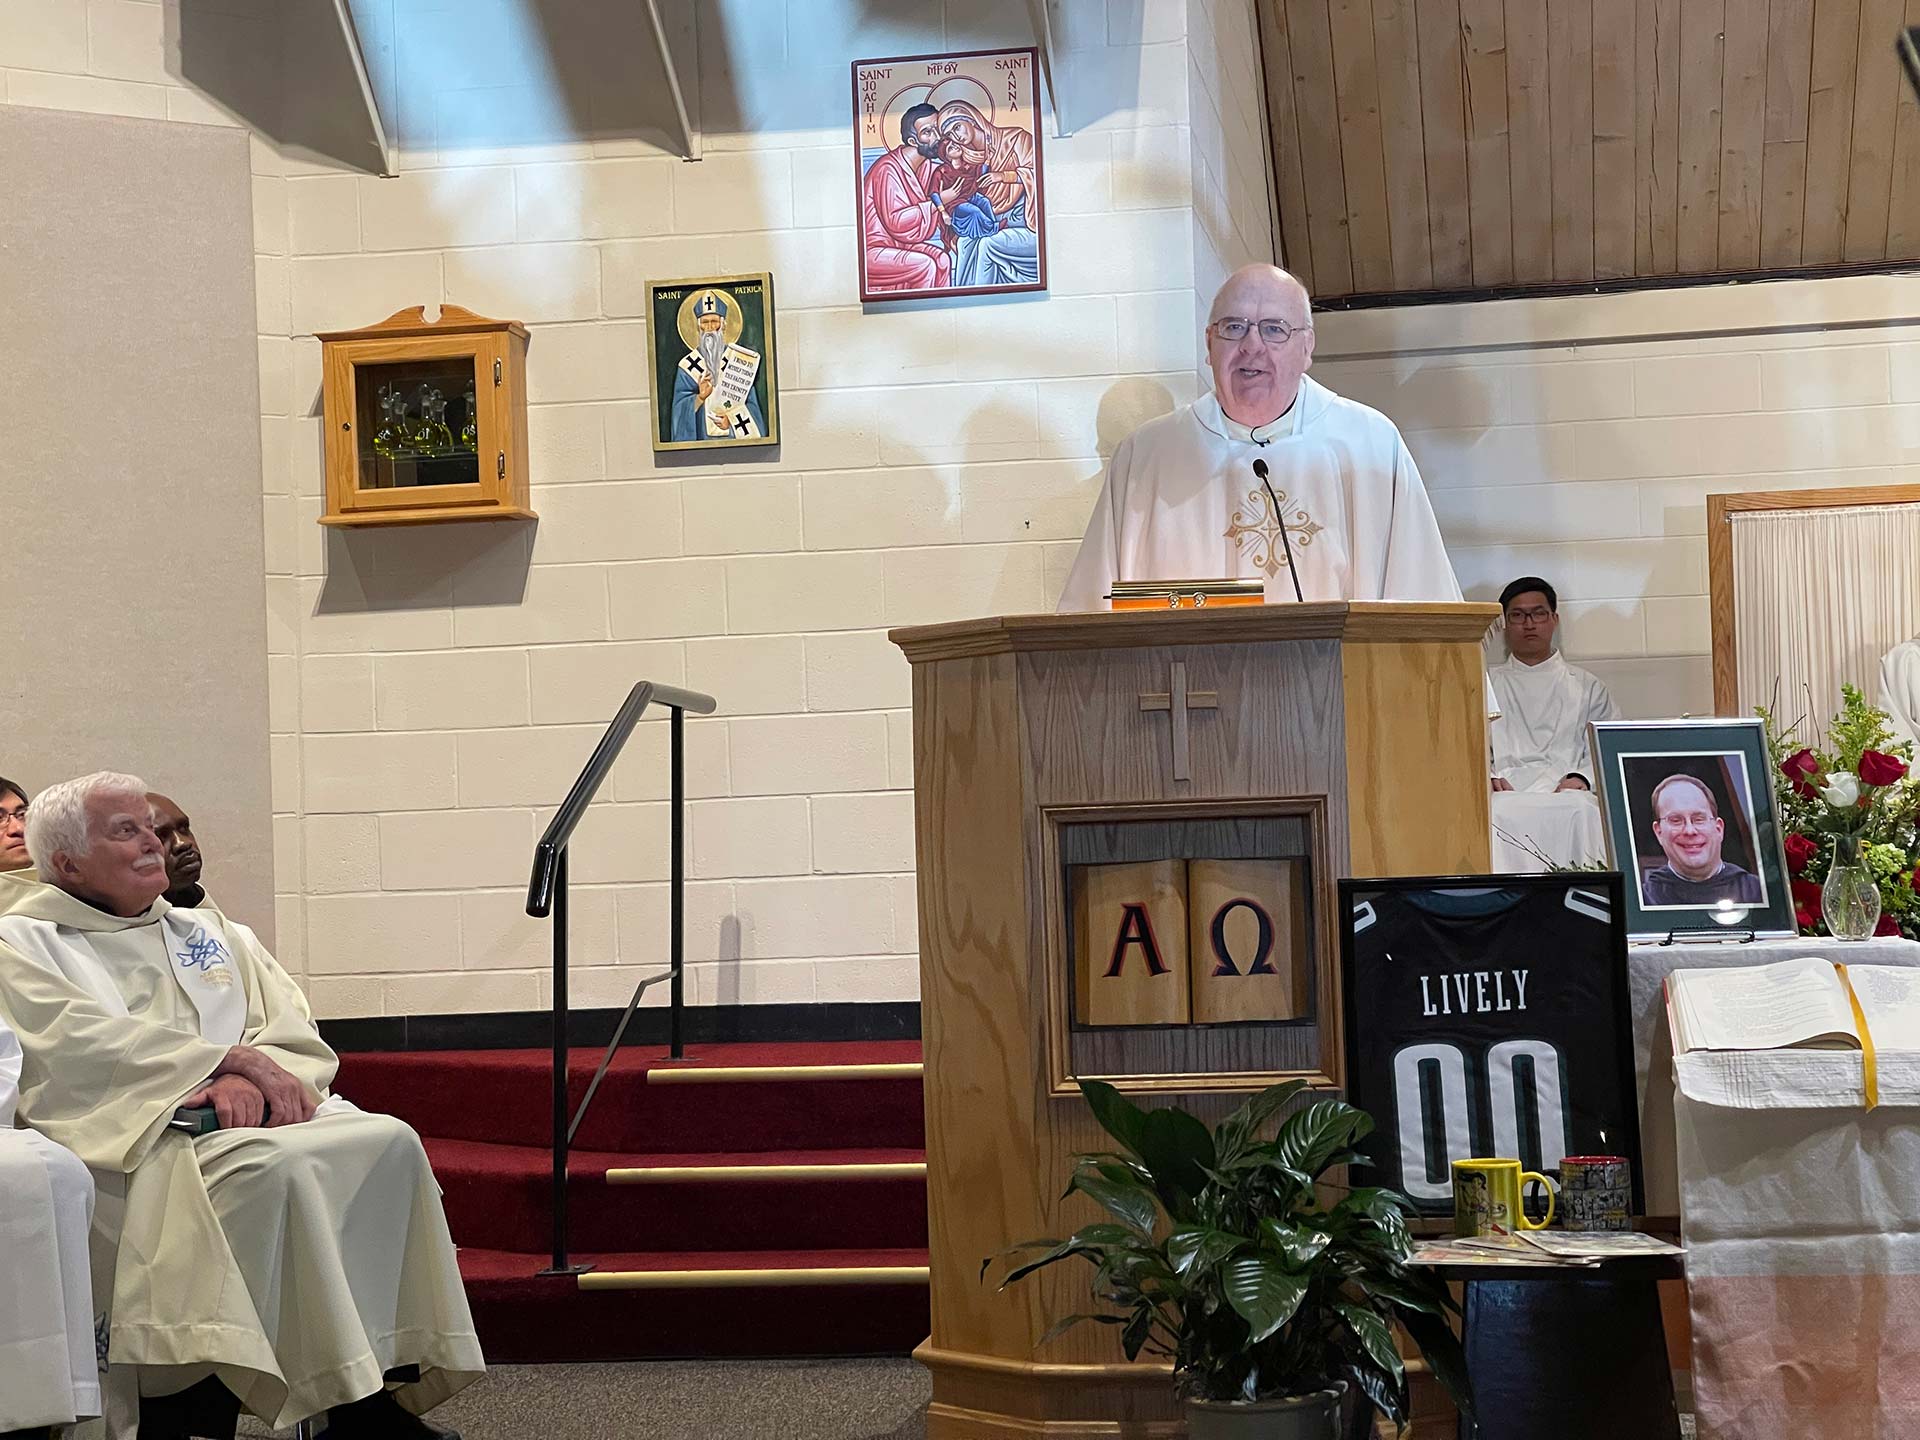 Homily at the Funeral Mass for Jerome Lively, A.A.